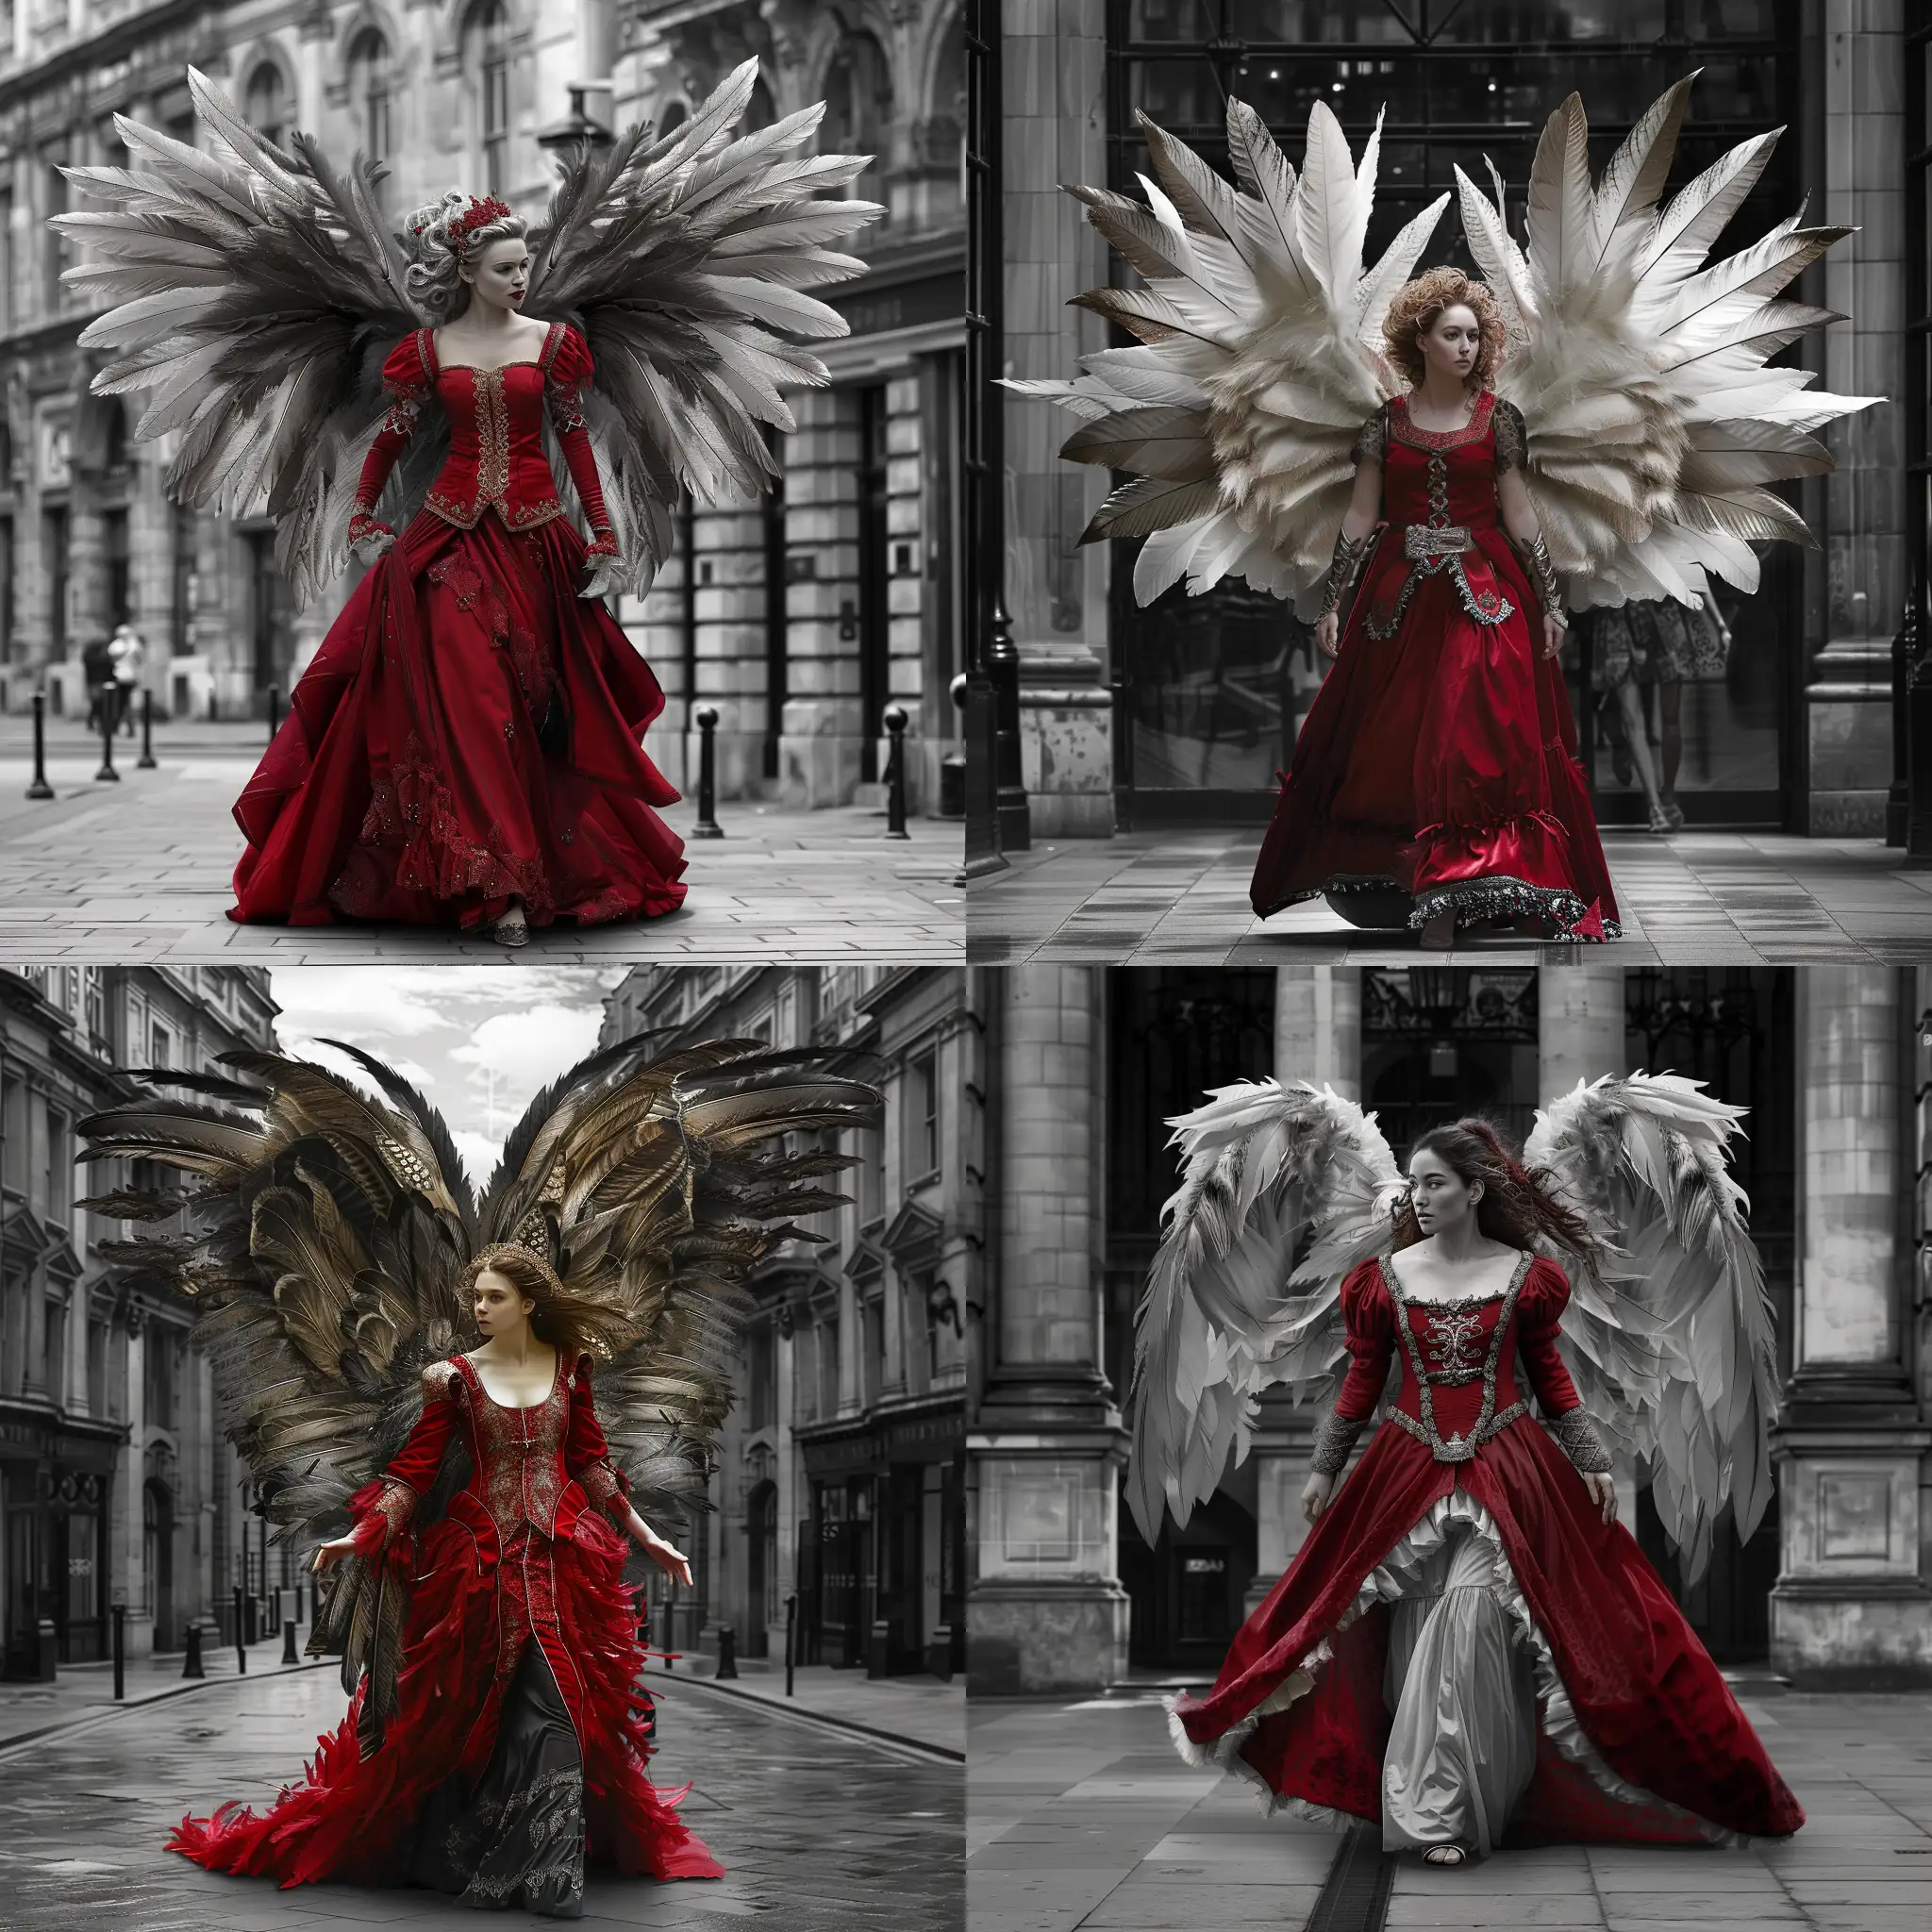 Mystical-Woman-with-Feathered-Wings-Strolling-through-Black-and-White-Central-London